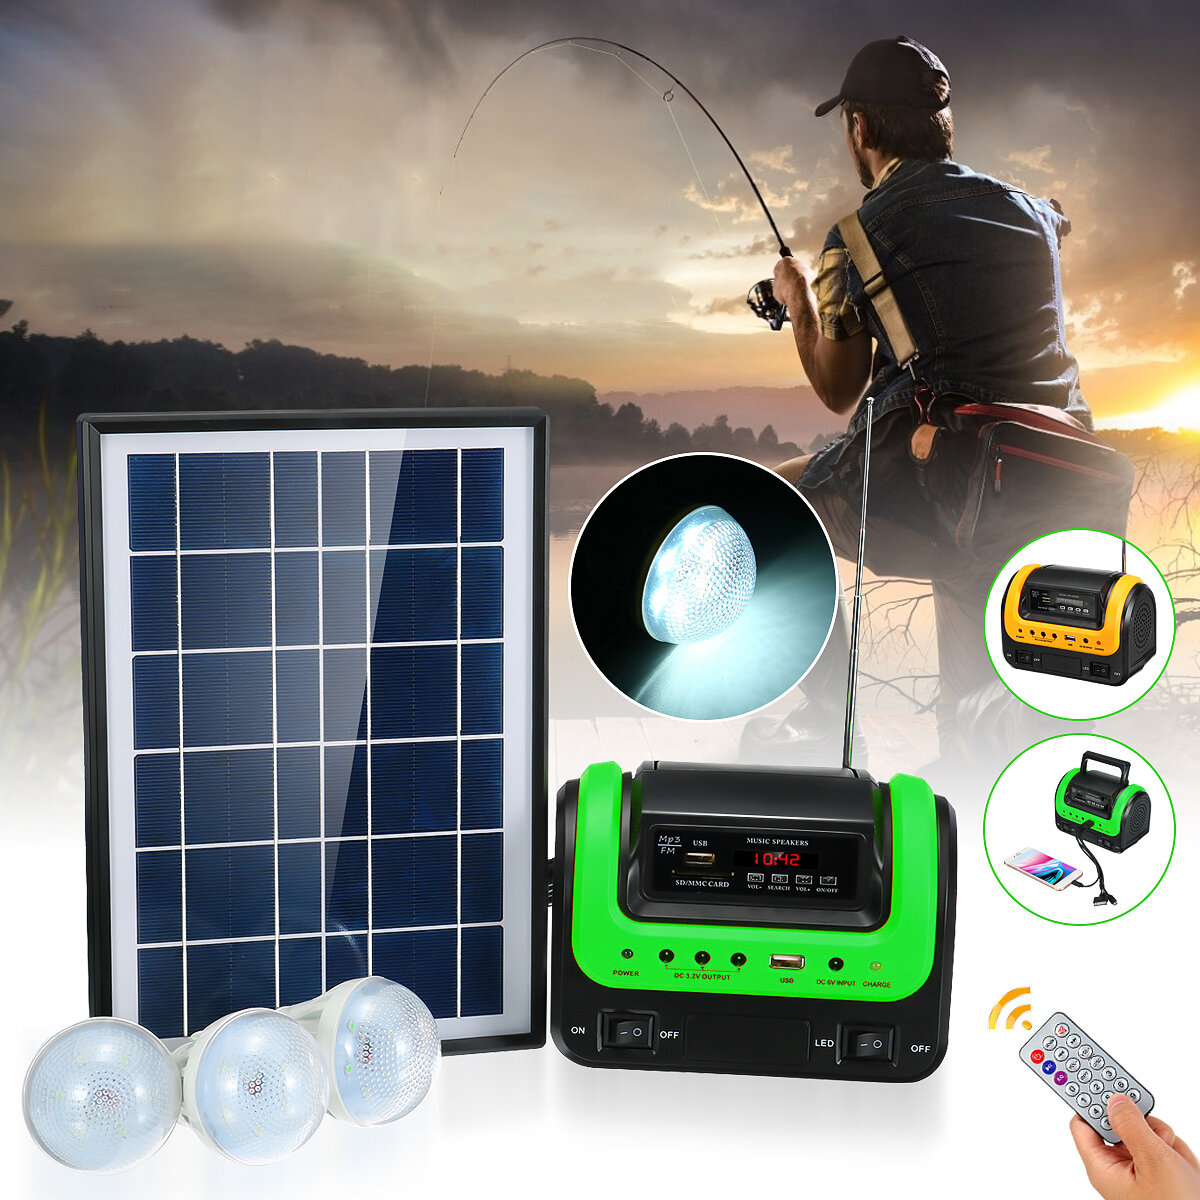 5W solare Kit pannello DC System Energy Elettricità Carica Potenza 3 LED Lampadine Luce Indoor Outdoor Power Bank